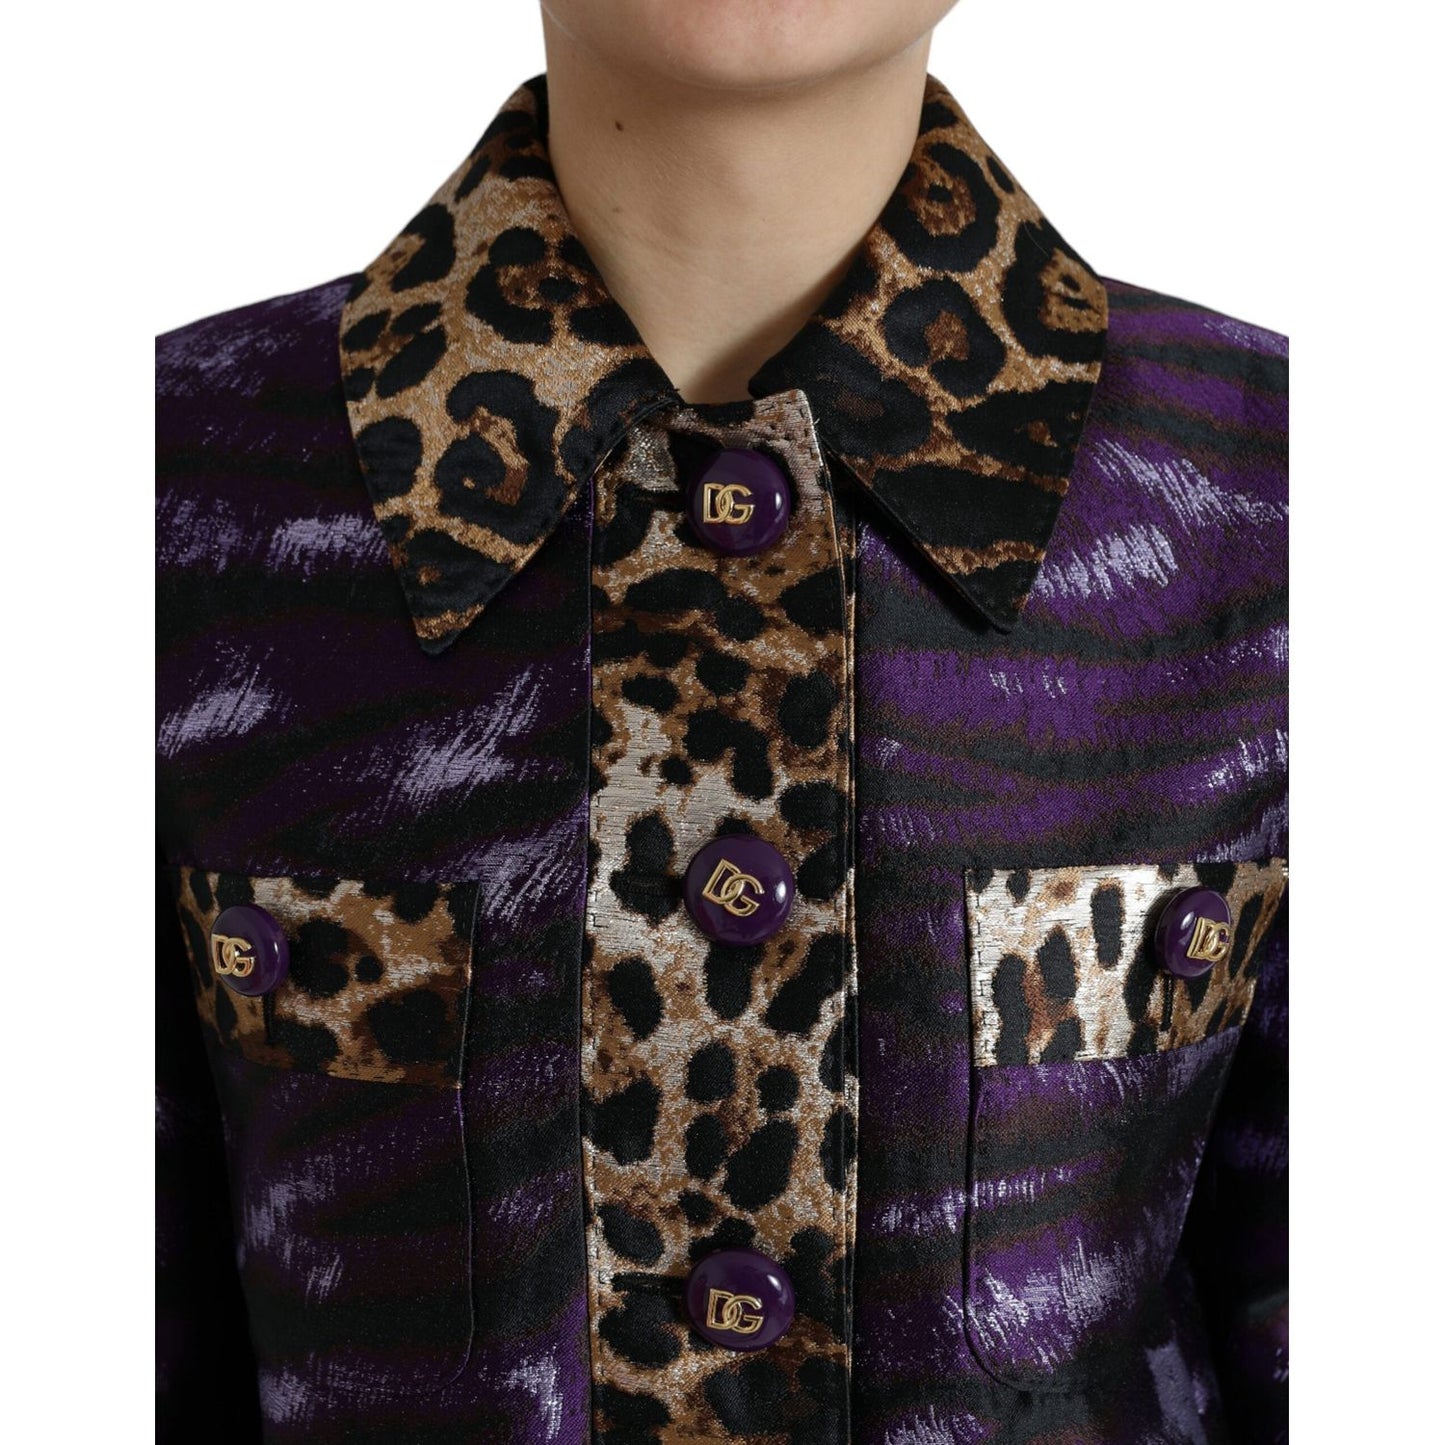 Dolce & Gabbana Exquisite Jacquard Trench With Tiger Motif purple-lame-jacquard-tiger-print-coat-jacket 465A8998-BG-scaled-7270dc09-b1d.jpg